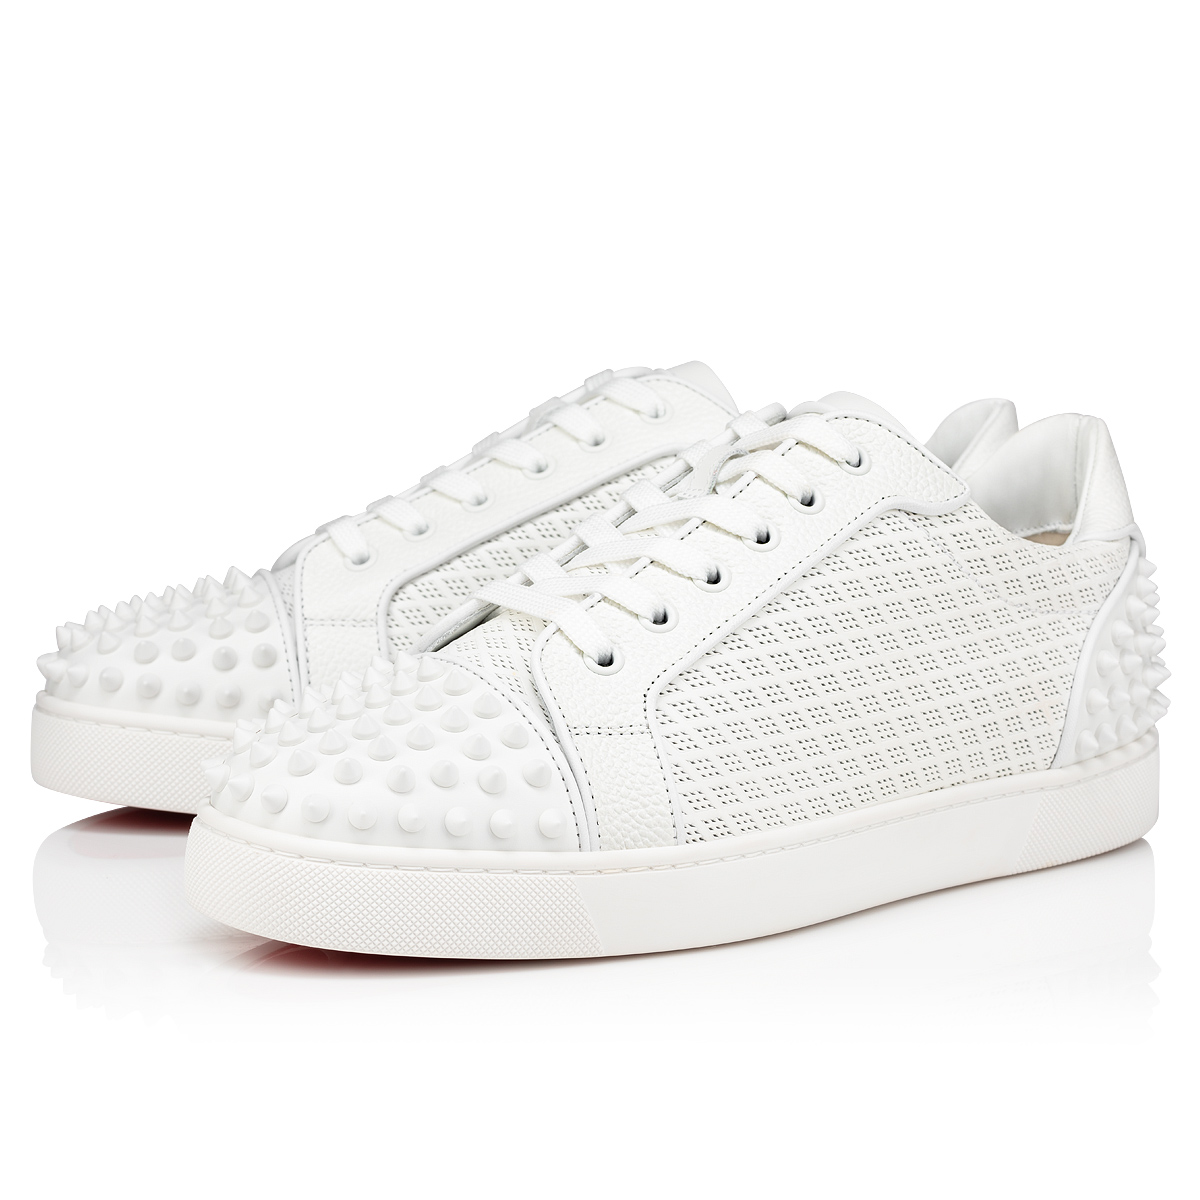 2 - Low-top Calf leather spikes - White - Christian Louboutin